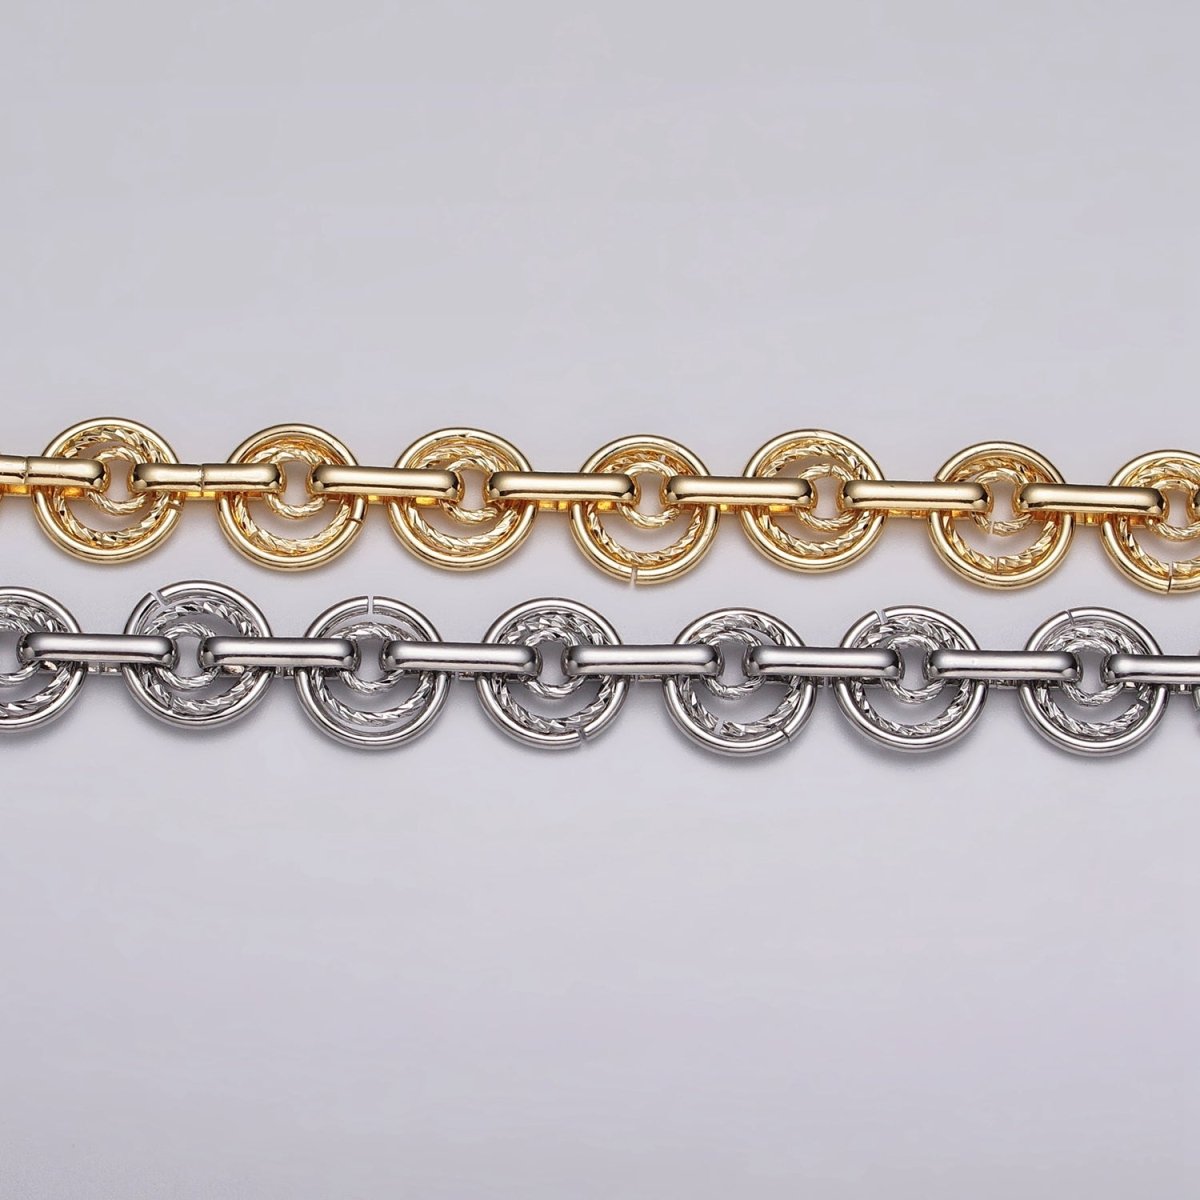 24k Gold Filled Statement Designed Textured Round Rolo Unfinished Statement Chain in Gold & Silver | ROLL-1135, ROLL-1136 Clearance Pricing - DLUXCA